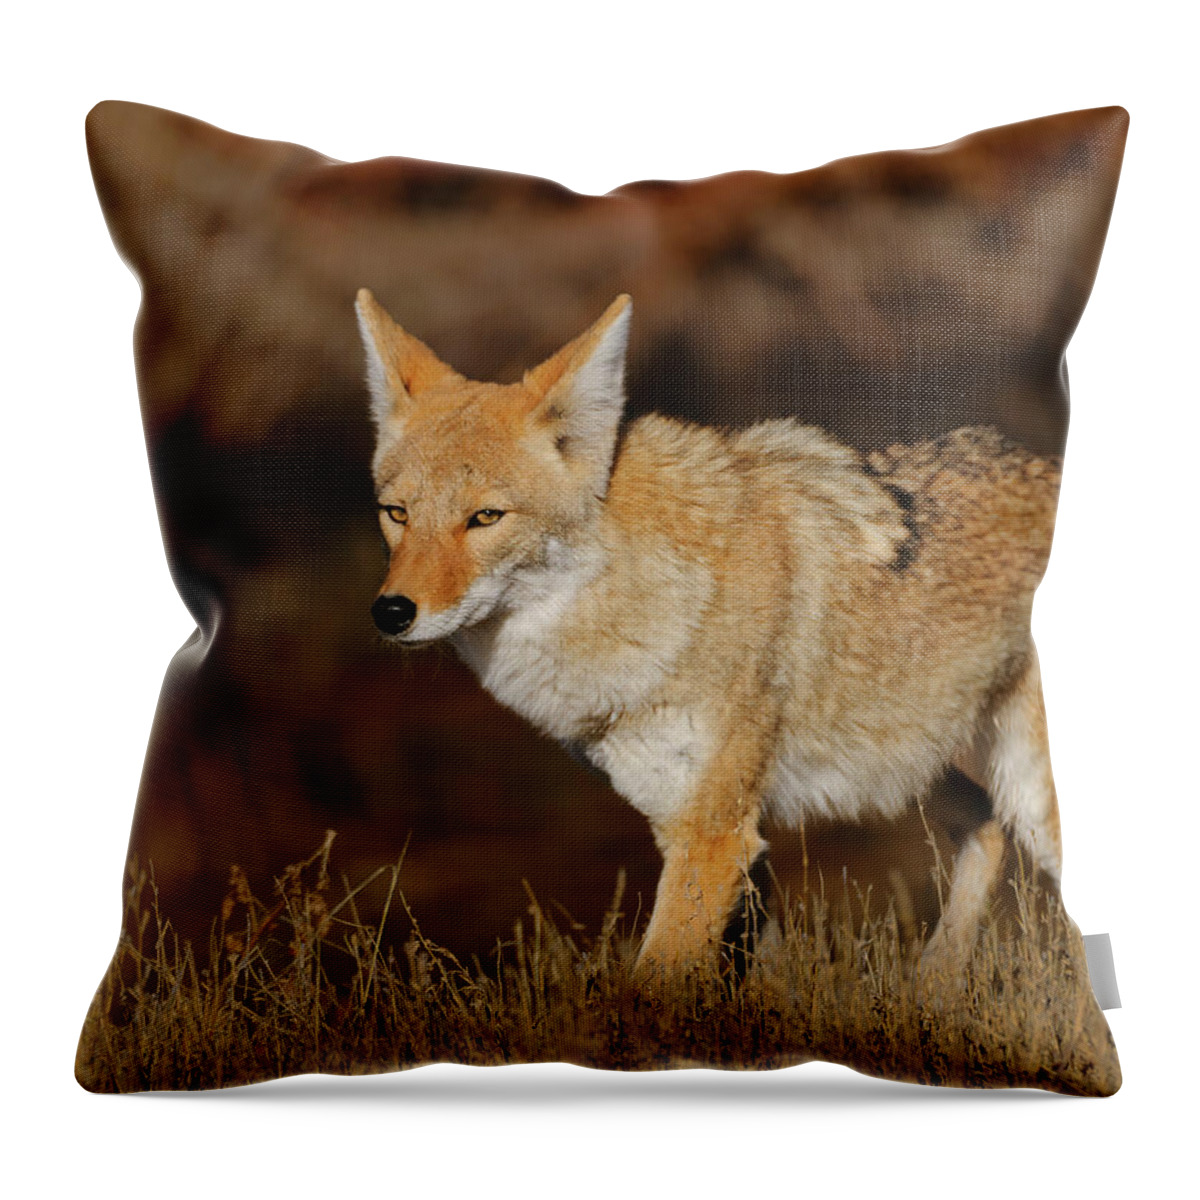 Coyote Throw Pillow featuring the photograph Coyote by Gary Langley